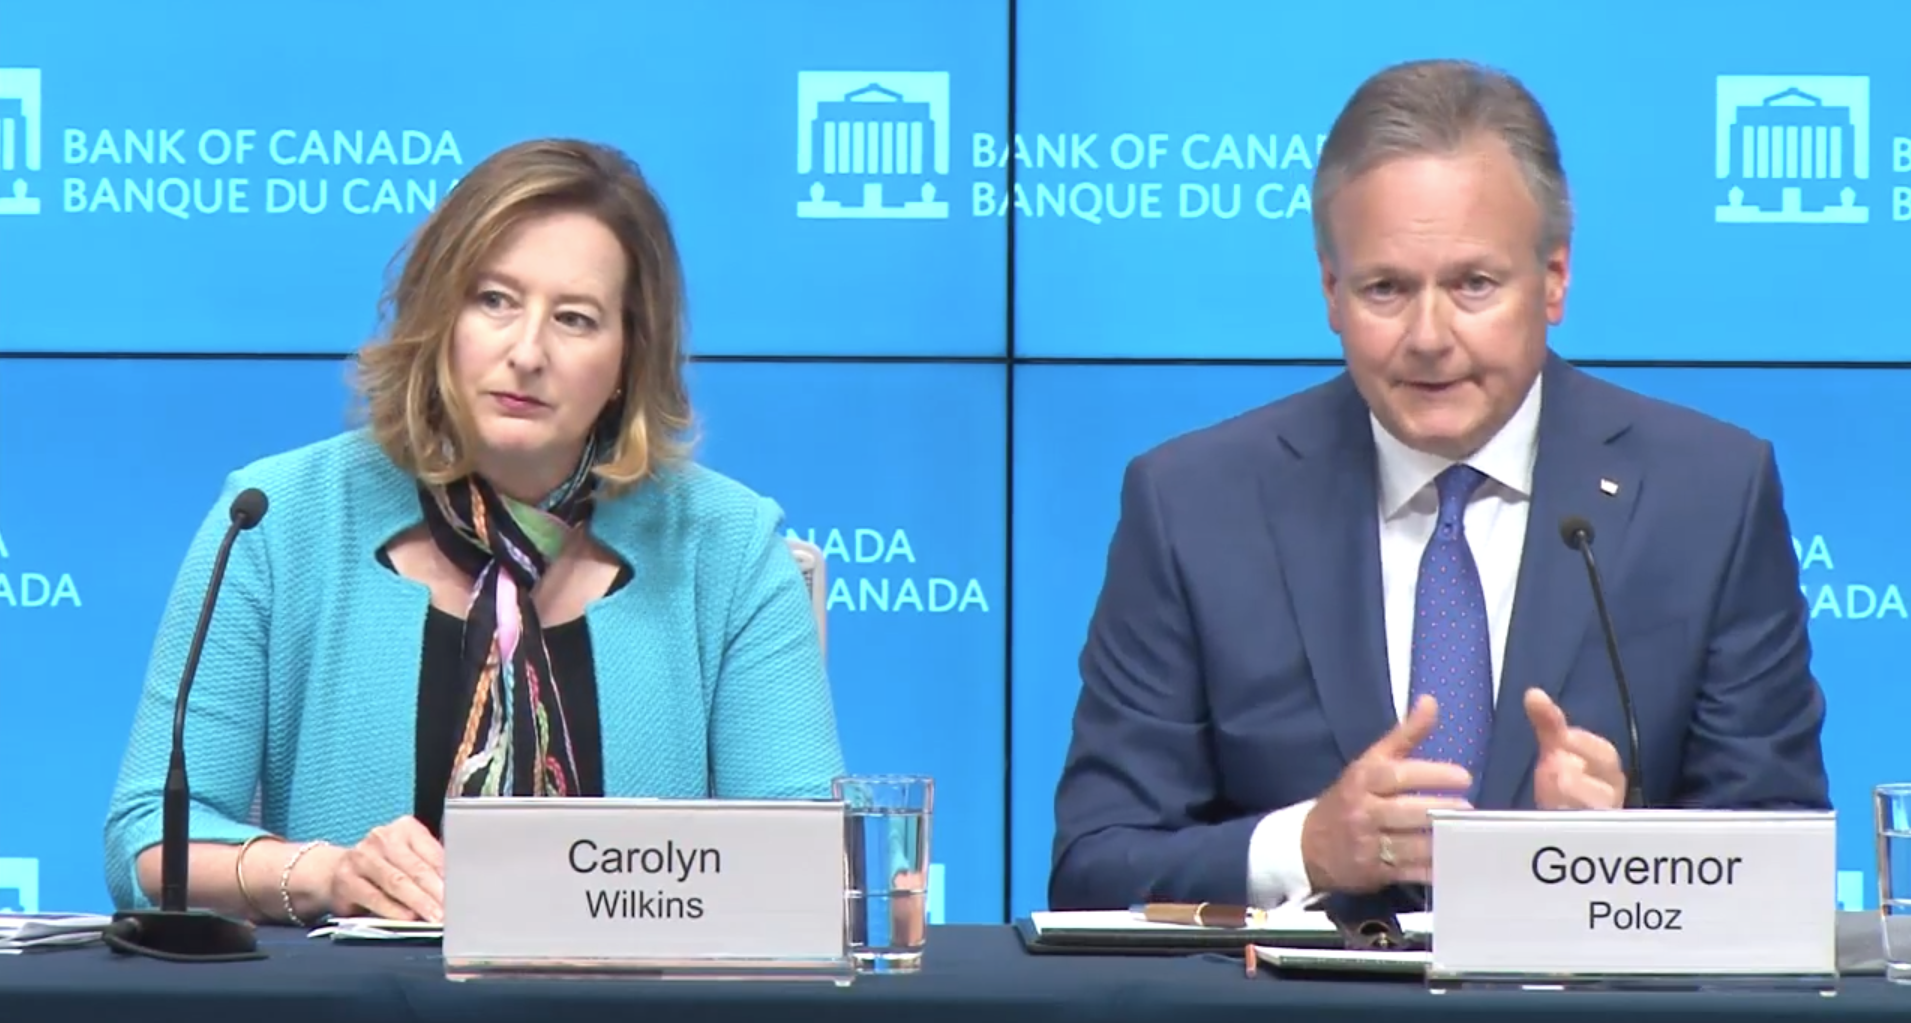 Bank of Canada Governor Poloz & senior deputy Wilkins speaking in a parliamentary committee